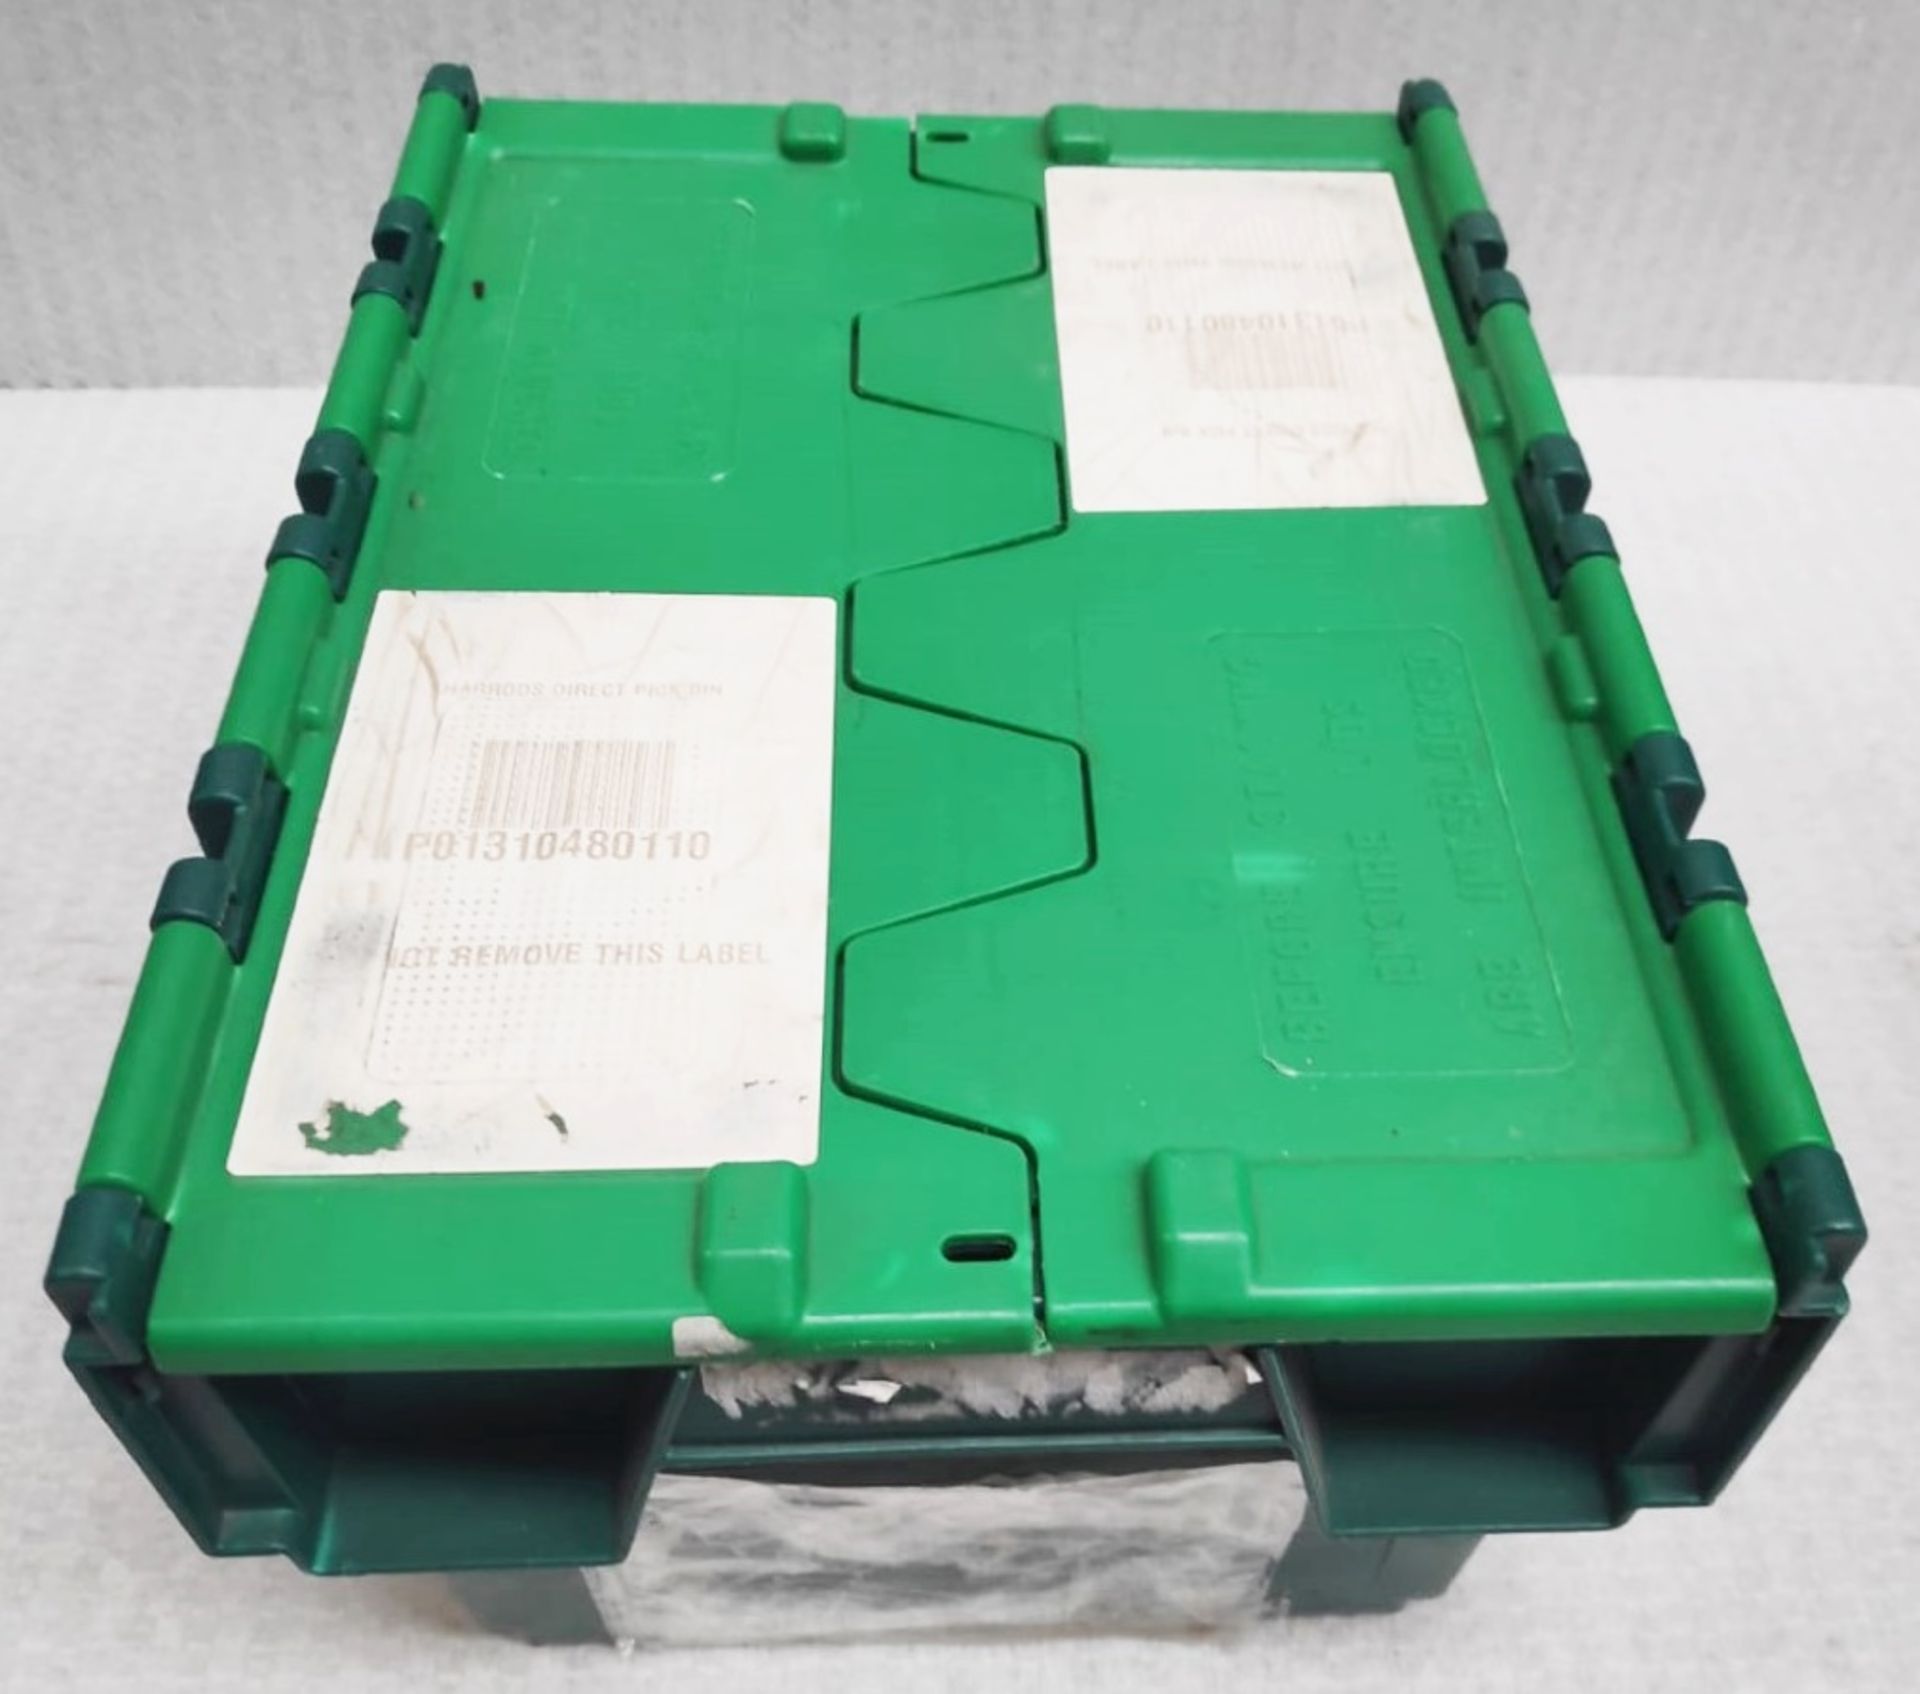 20 x Robust Compact Green Plastic Stackable Secure Storage Boxes With Attached Hinged Lids - Bild 3 aus 6